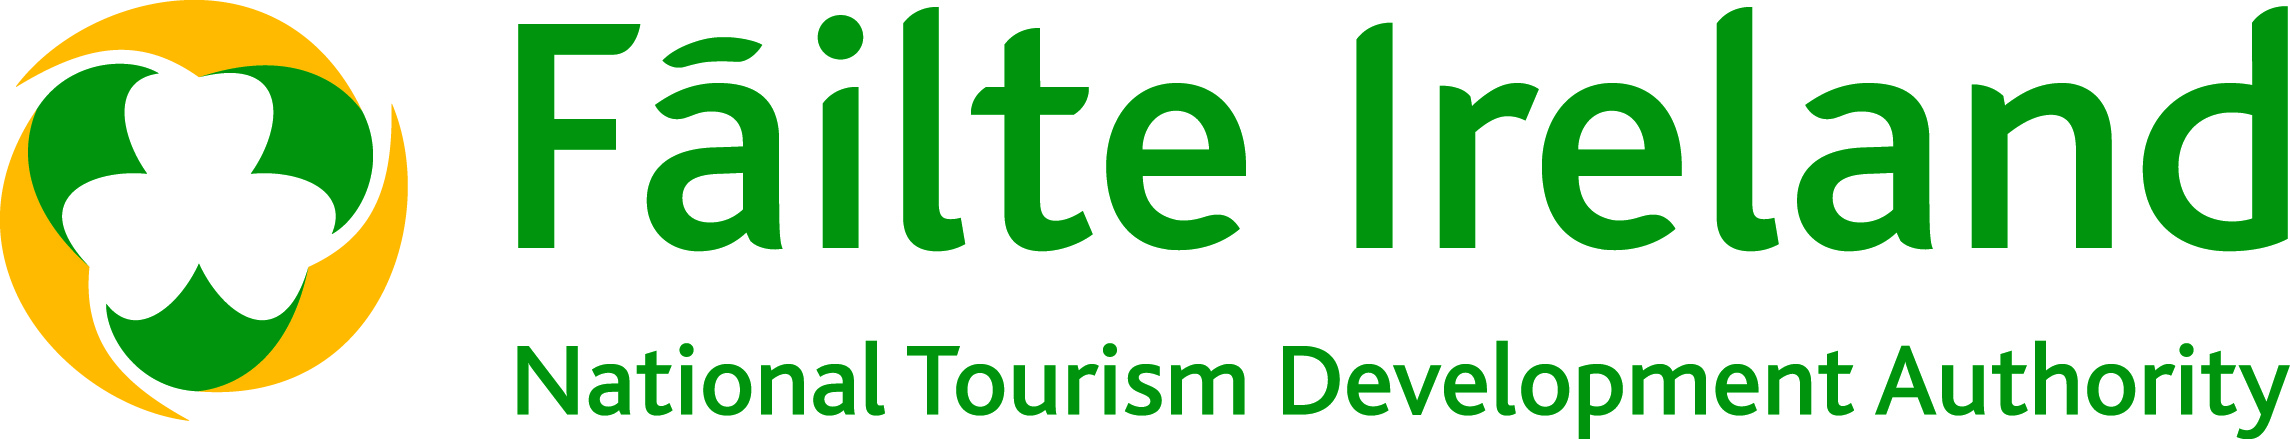 Image of a white 3-leaf clover next to text that reads, “Failte Ireland, National Tourism Development Authority”.